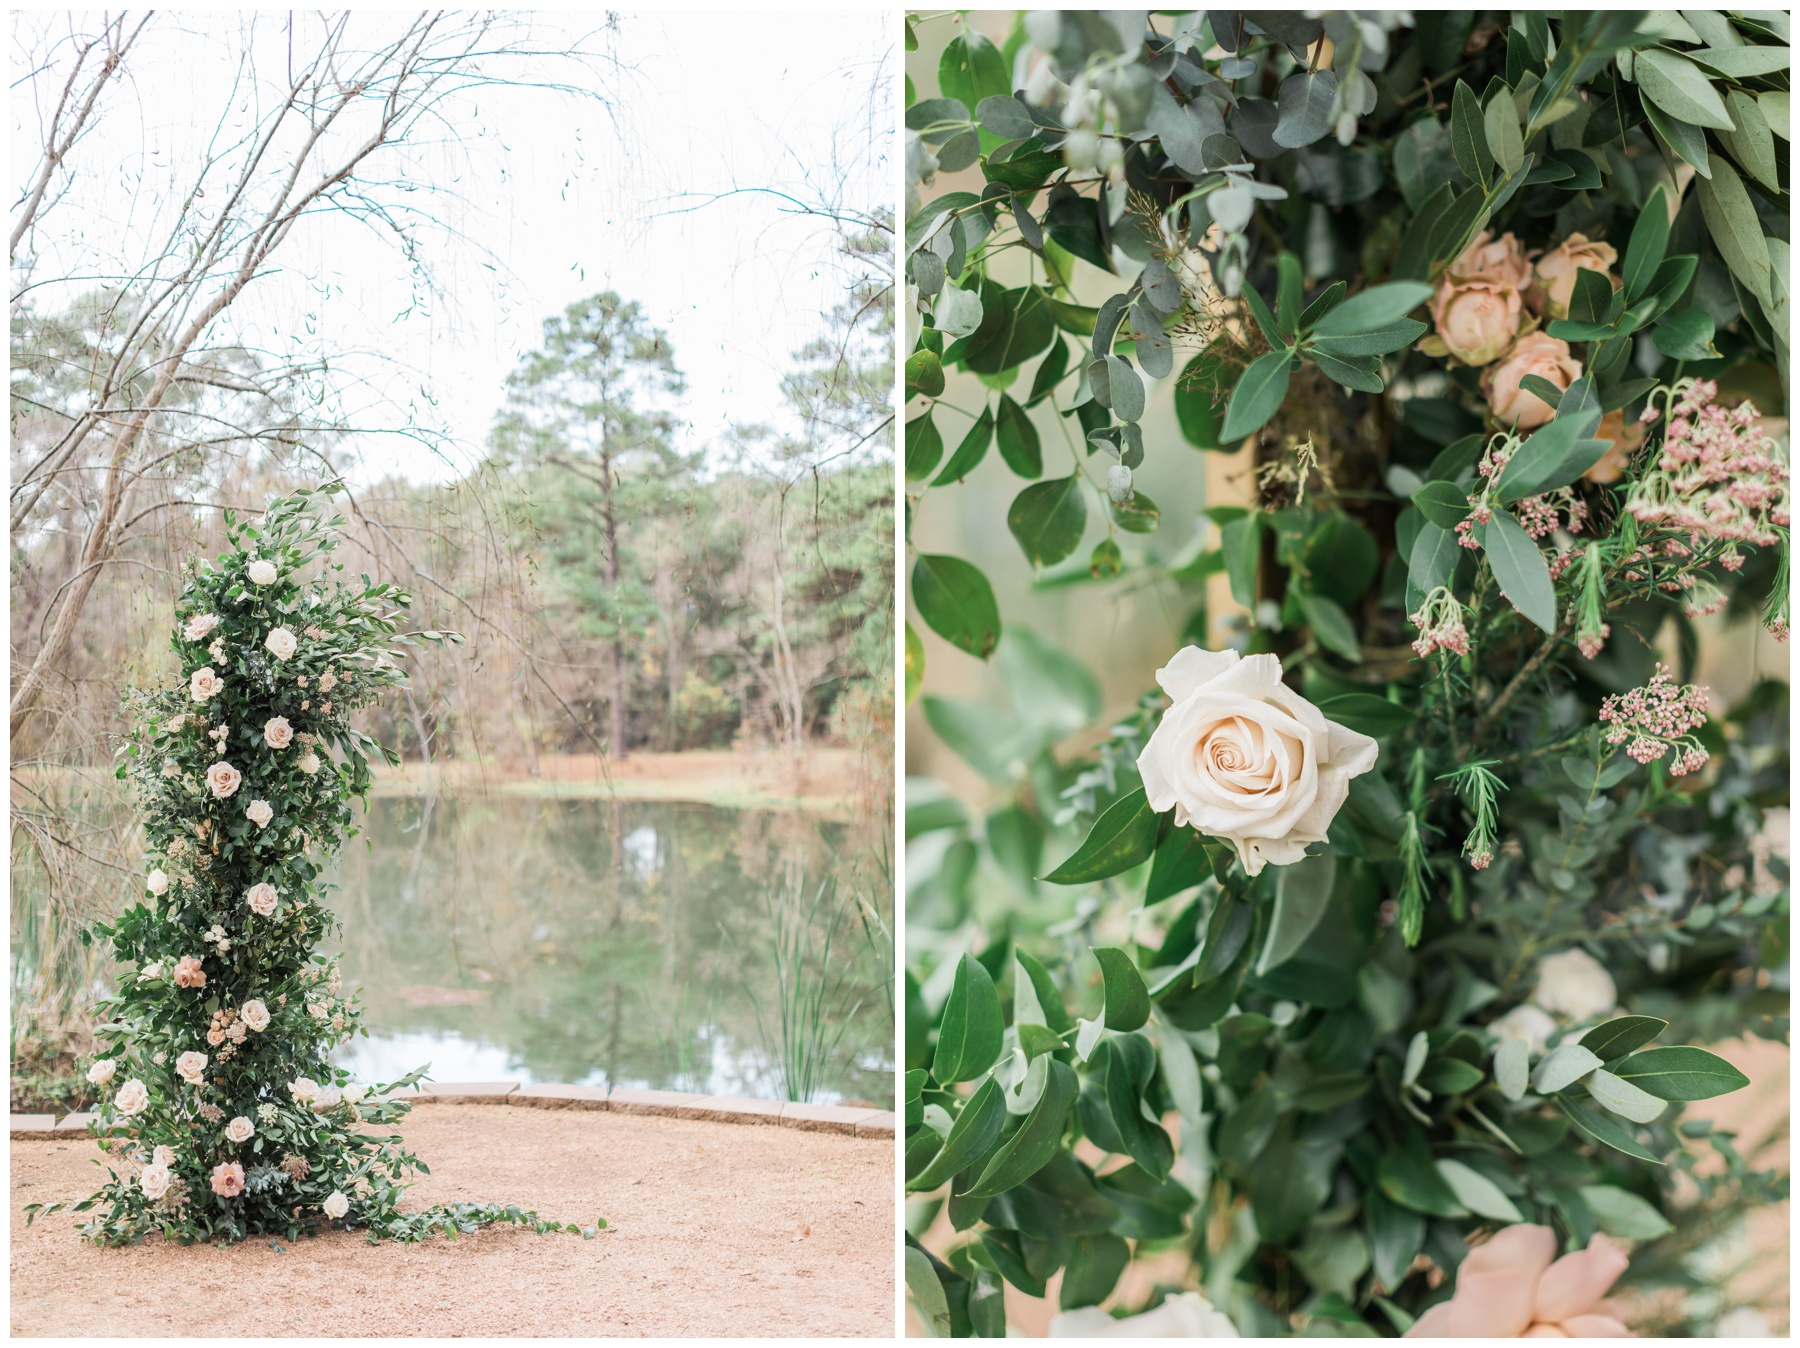 Neutral-toned florals for a winter bridal session at Forever 5